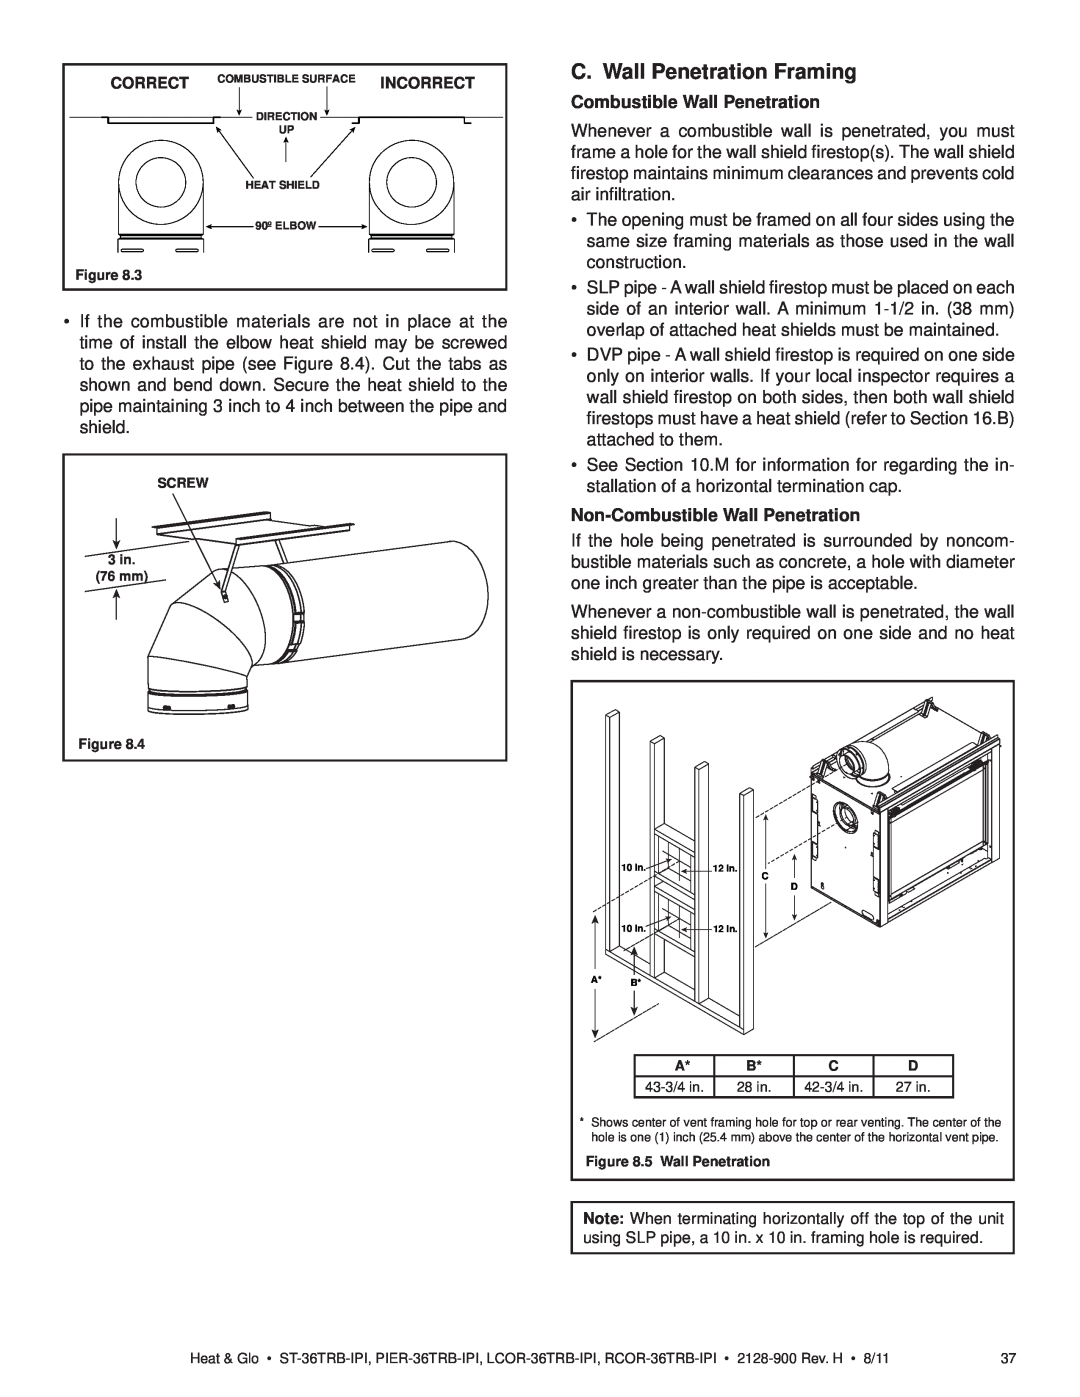 Heat & Glo LifeStyle ST-36TRB-IPI owner manual C. Wall Penetration Framing, Combustible Wall Penetration 